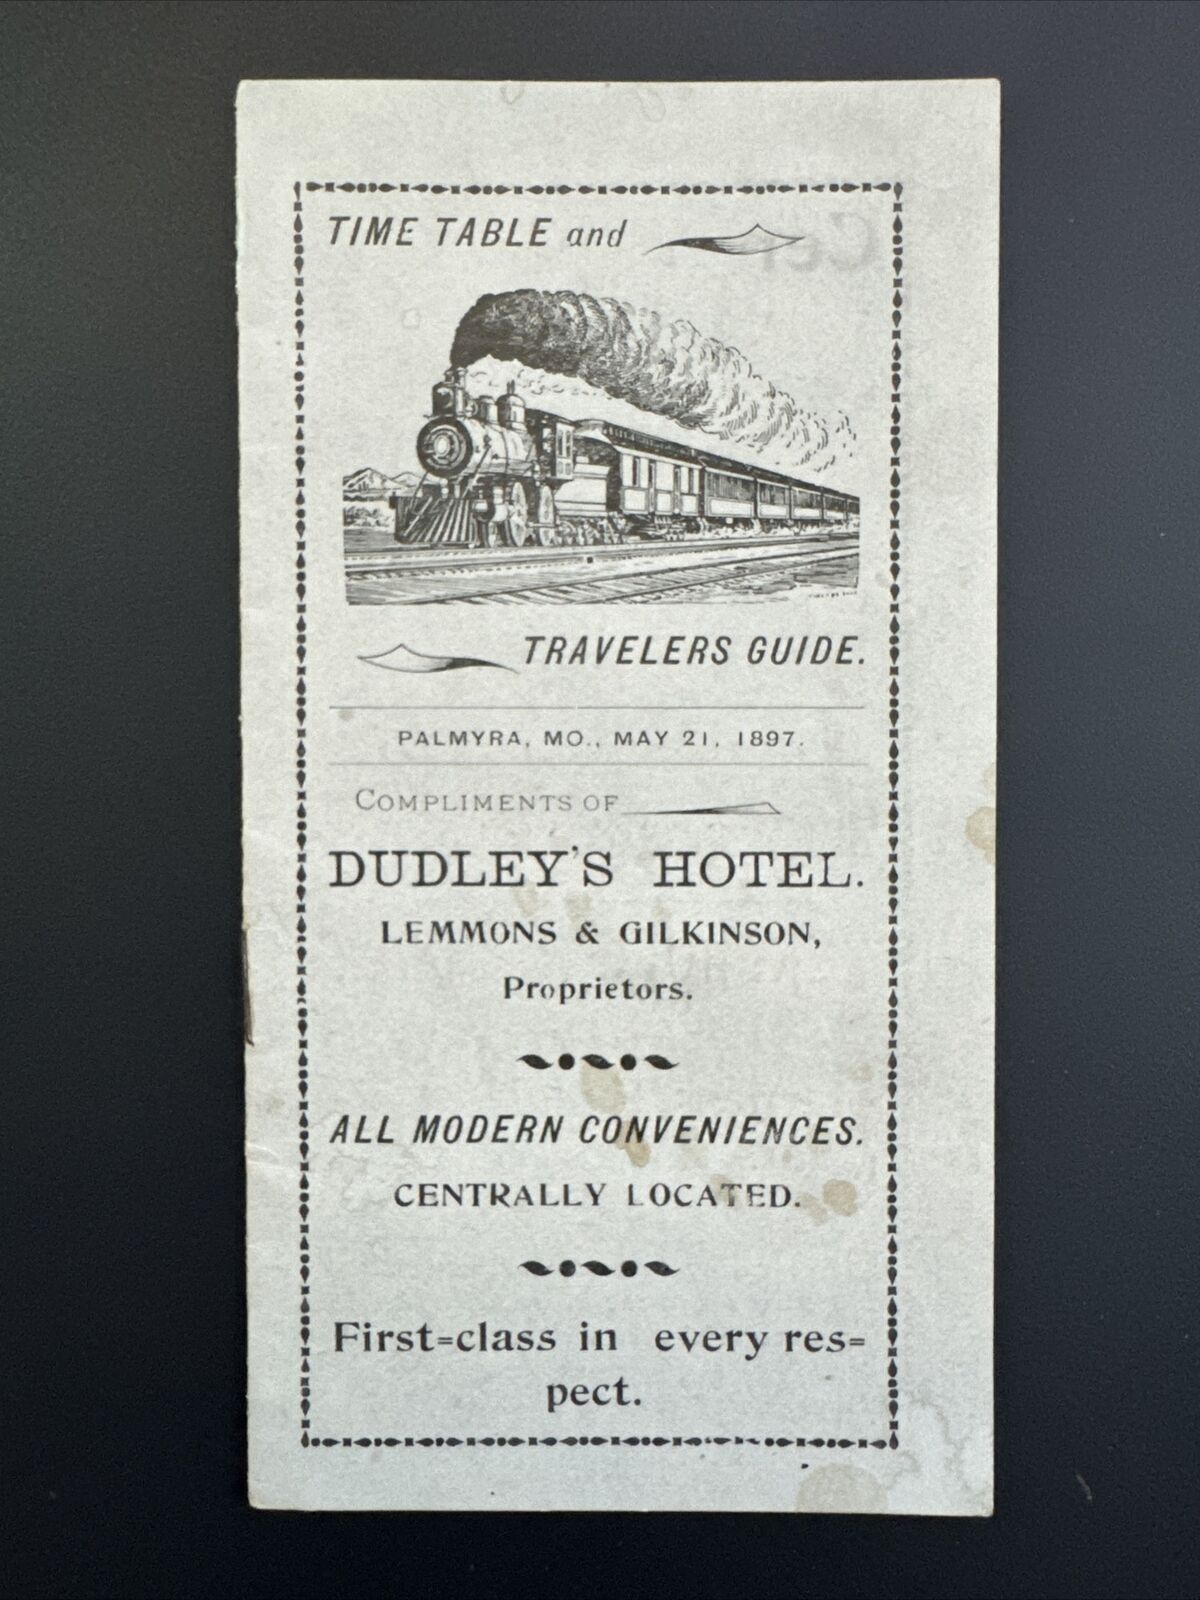 1897 Antique Palmyra Mo, Time Table And Travelers Guide - Dudley’s Hotel - Train